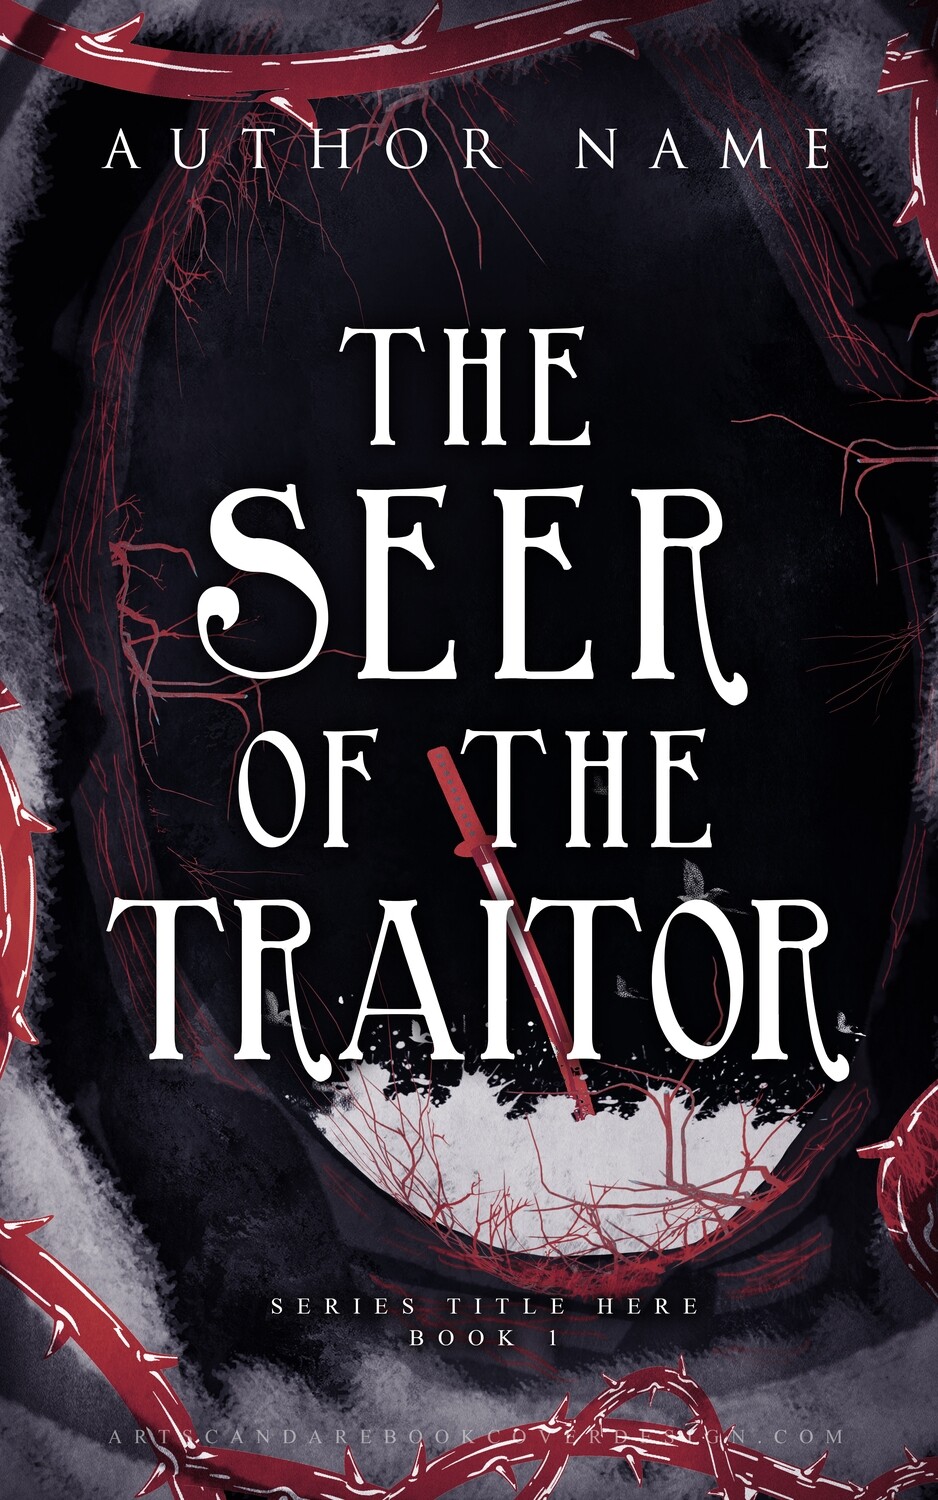 THE SEER OF THE TRAITOR